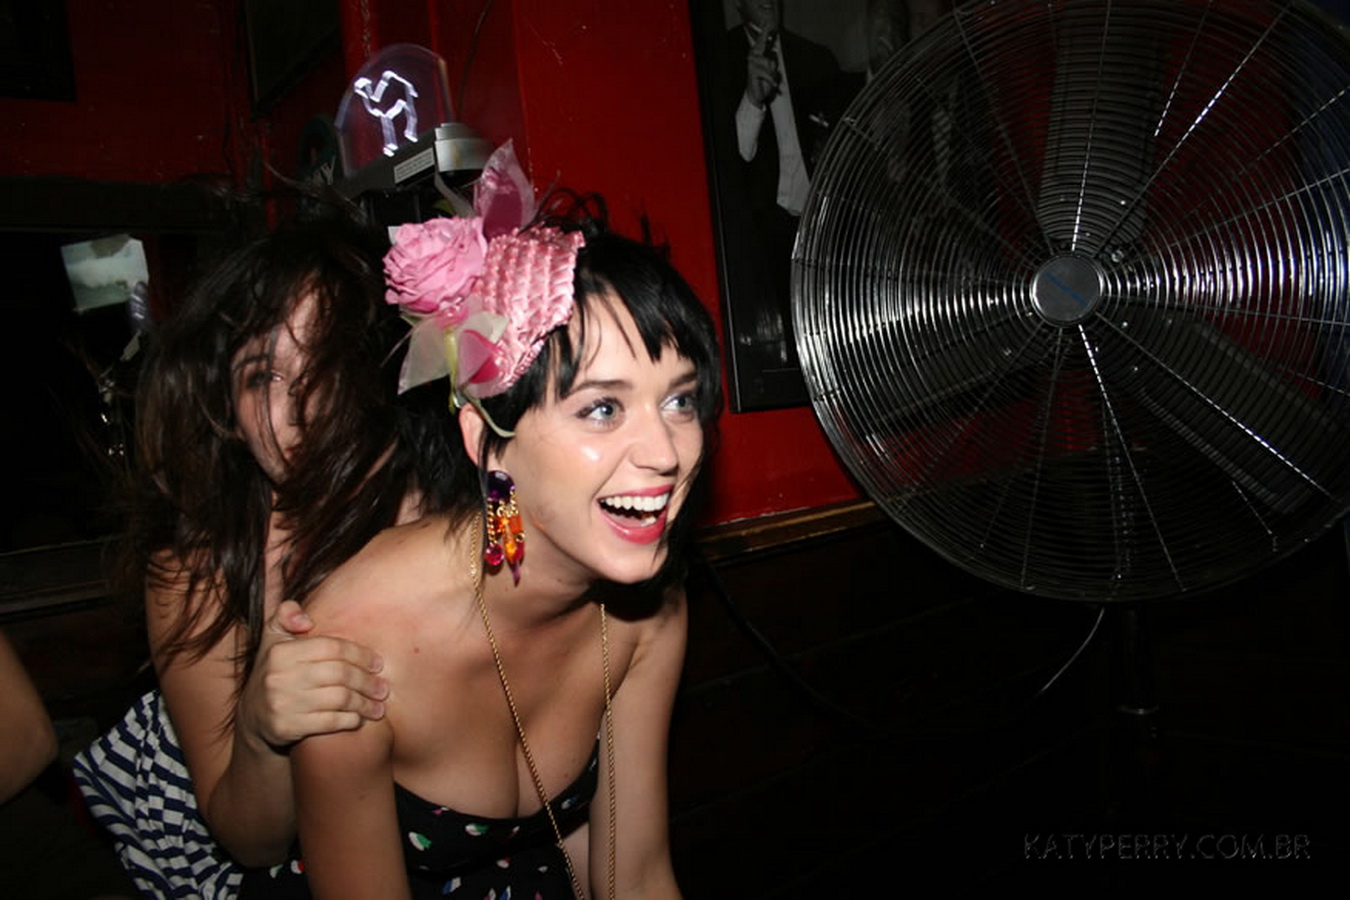 Katy_Perry_bobsslip_drunk_cleavage_downblouse_upskirt_nipslip_at_her_birthday_2007_party_99x_HQ_102.jpg